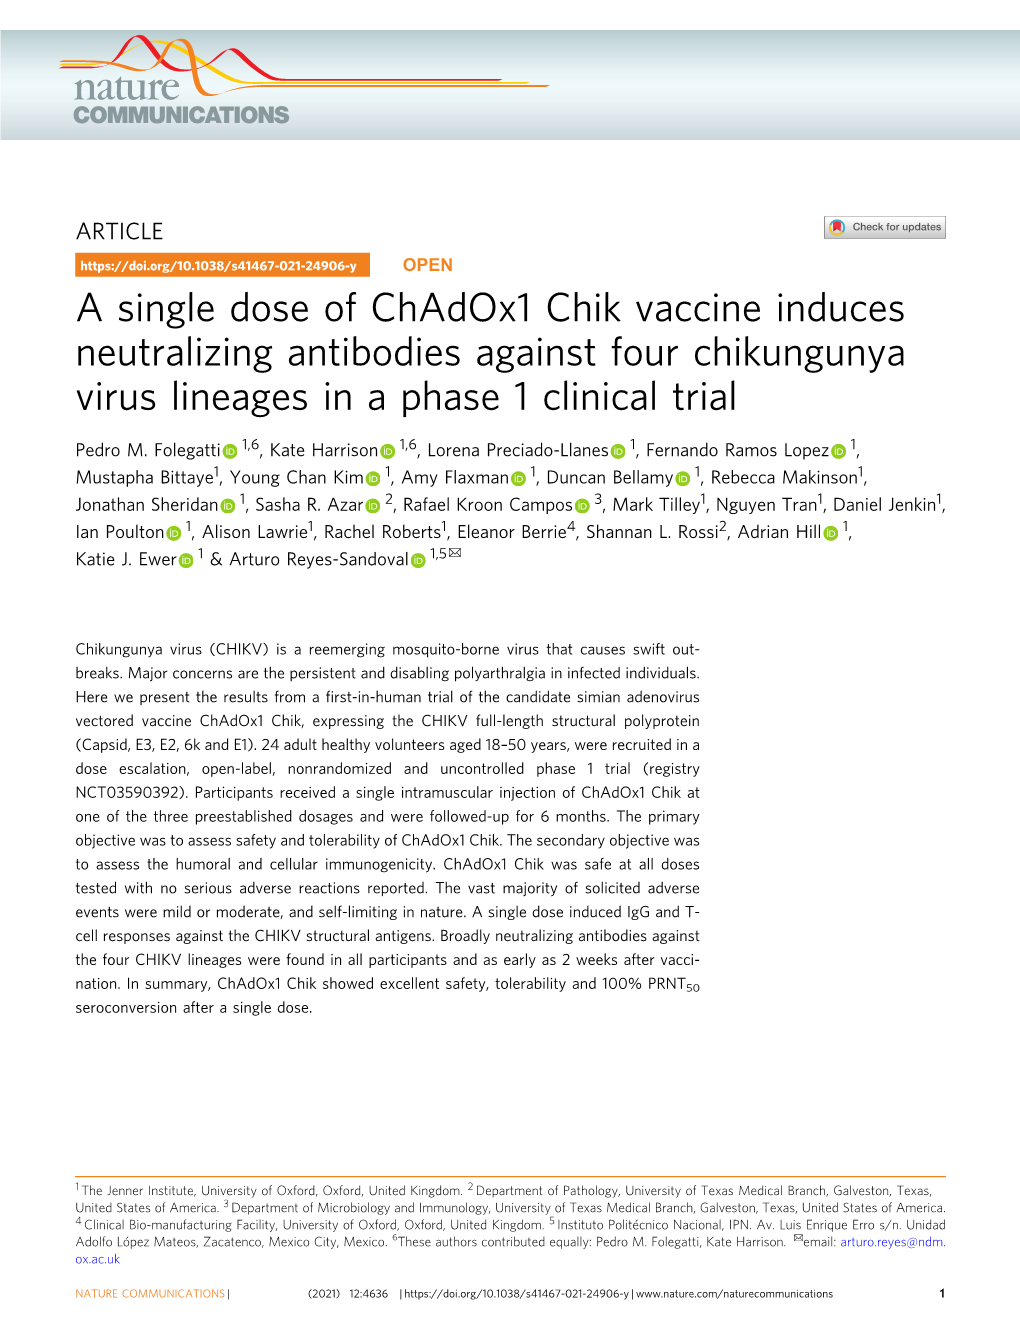 A Single Dose of Chadox1 Chik Vaccine Induces Neutralizing Antibodies Against Four Chikungunya Virus Lineages in a Phase 1 Clinical Trial